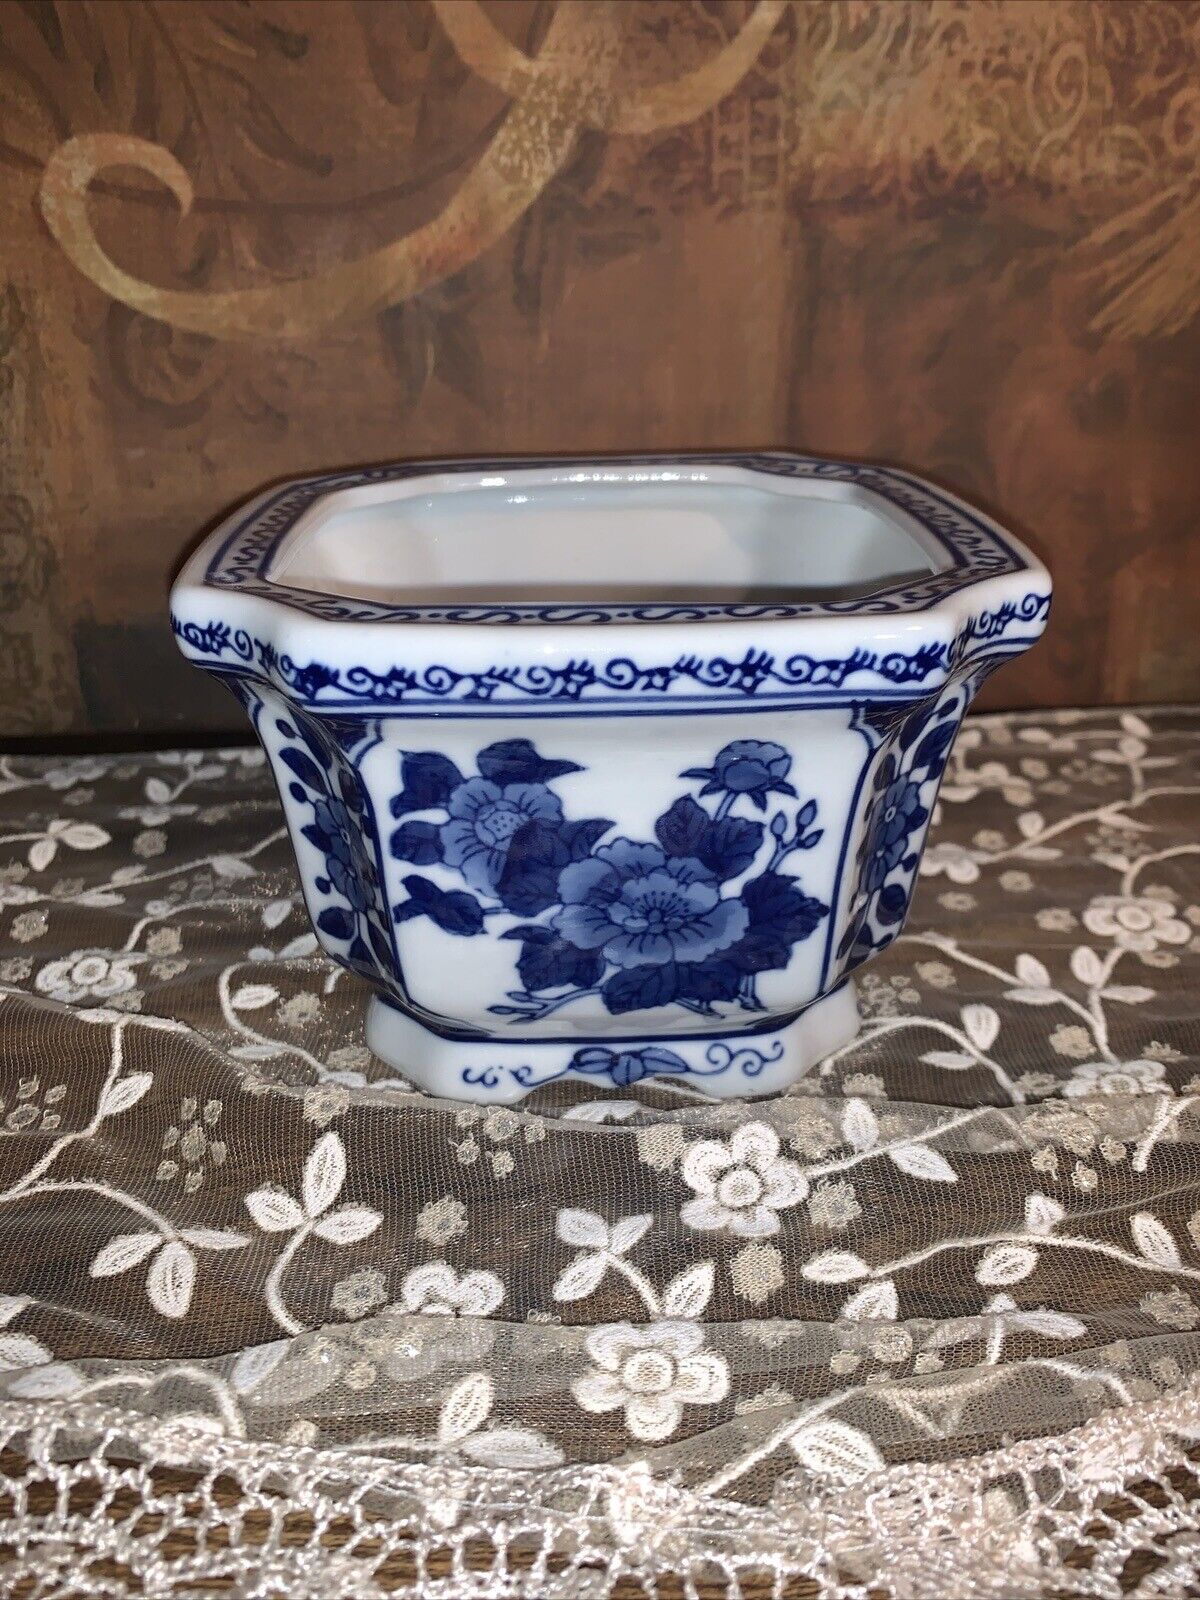 Antique Octagonal Chinoiserie Planter Delft Blue White Floral Scroll Patterns